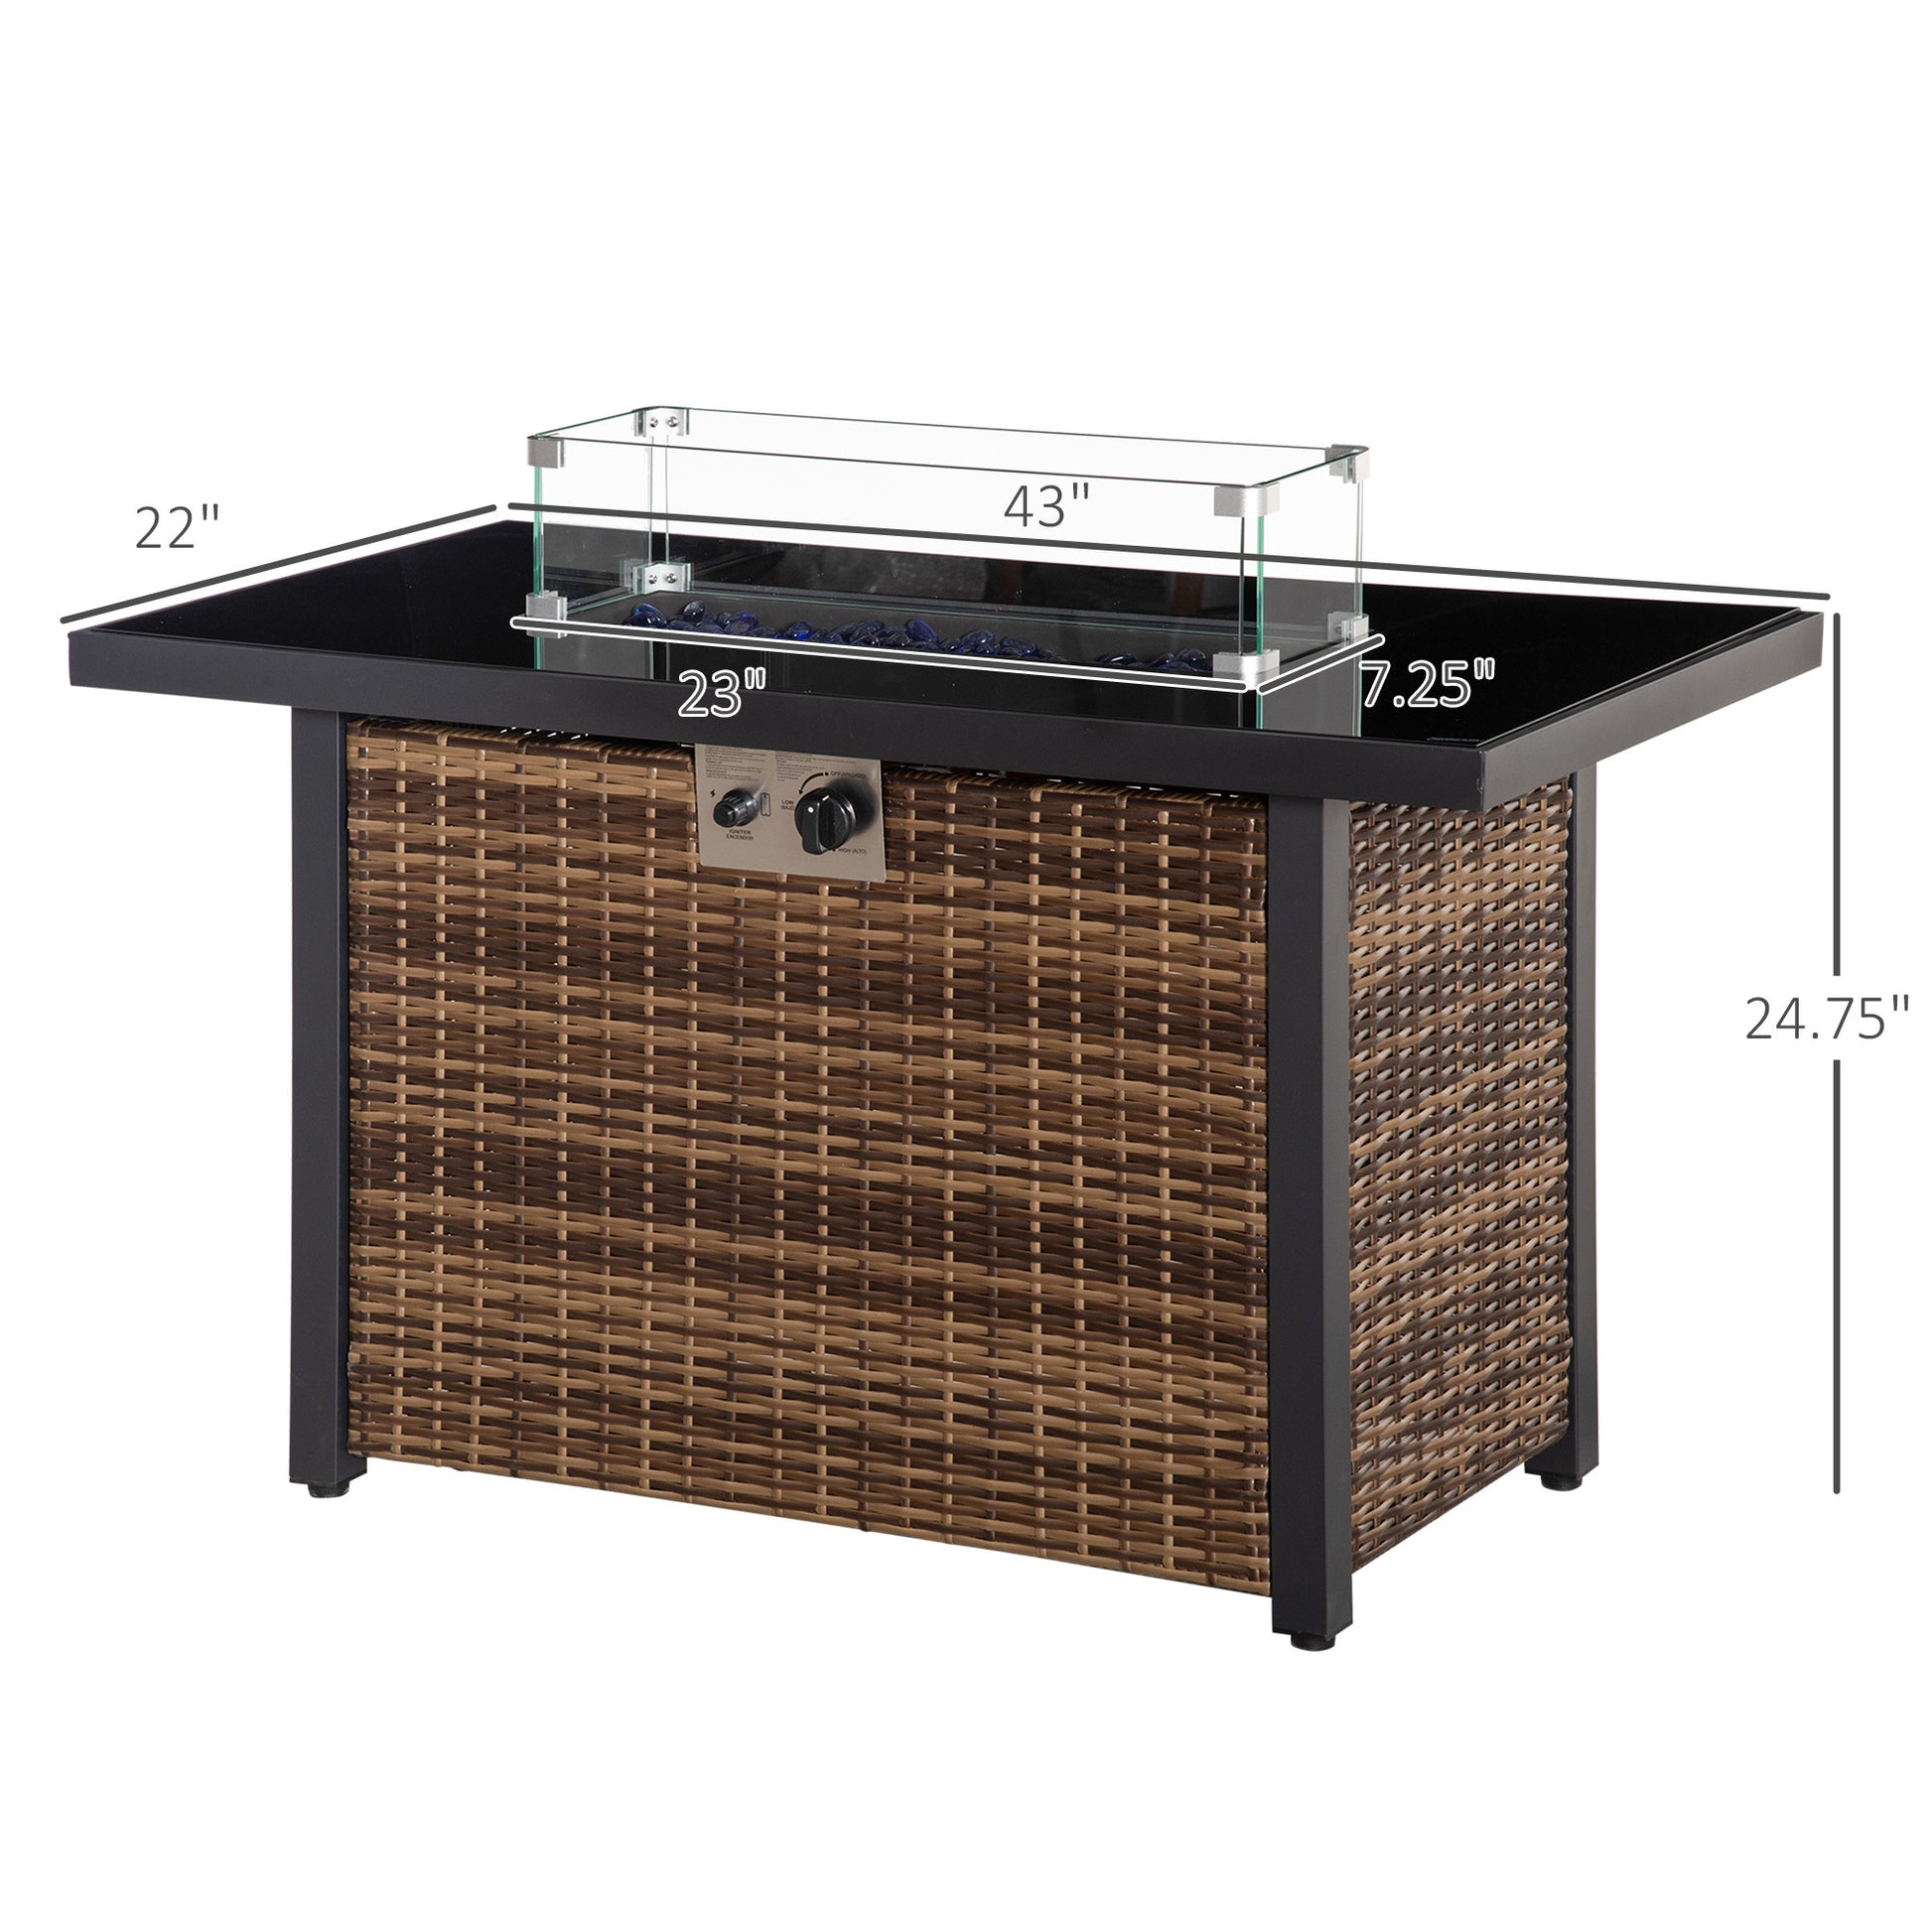 Outsunny 43In Outdoor Propane Gas Fire Pit Table